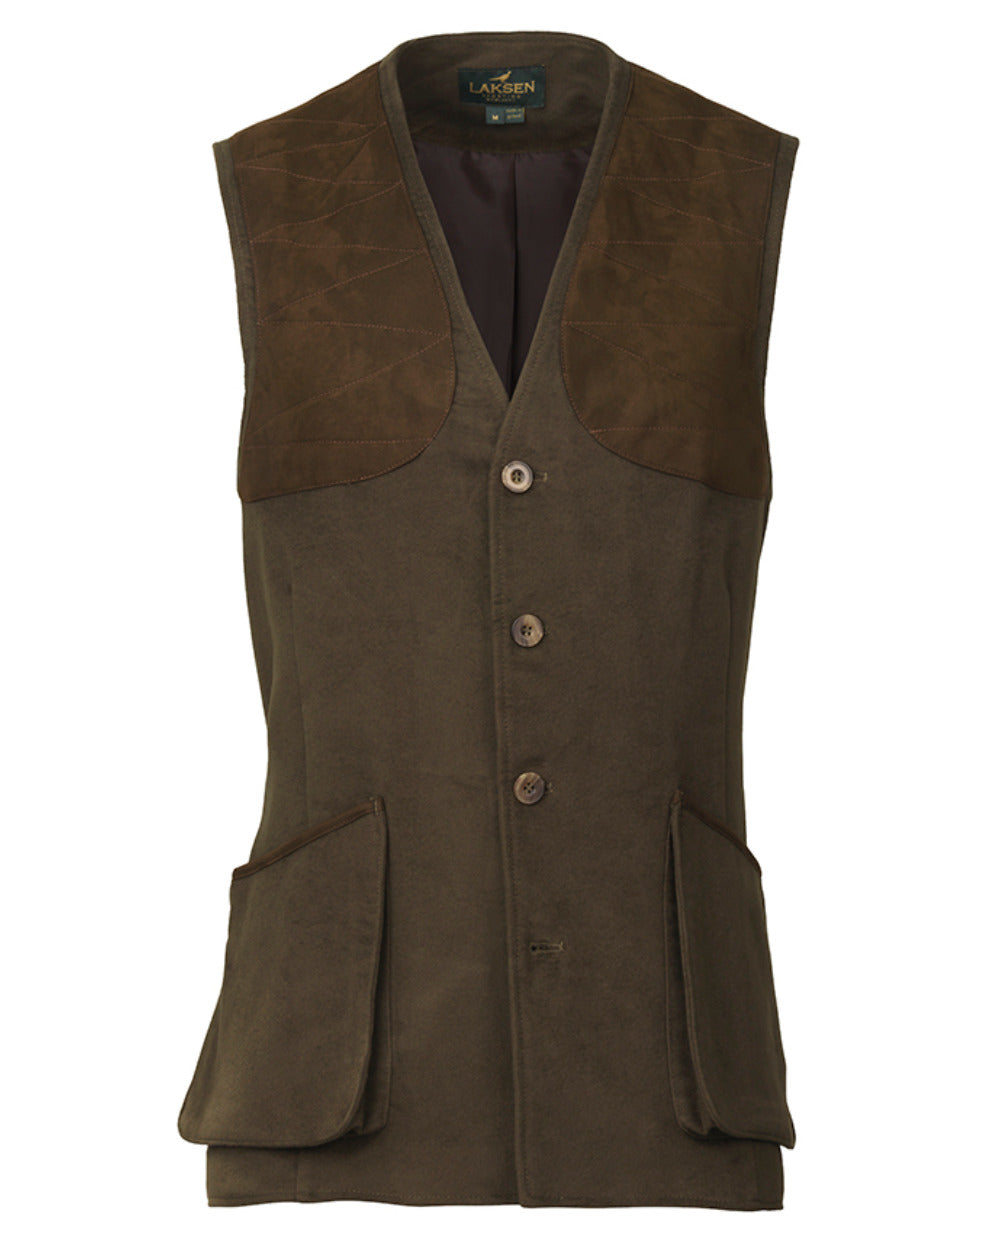 Loden Coloured Laksen Belgravia Leith Shooting Vest On A White Background 